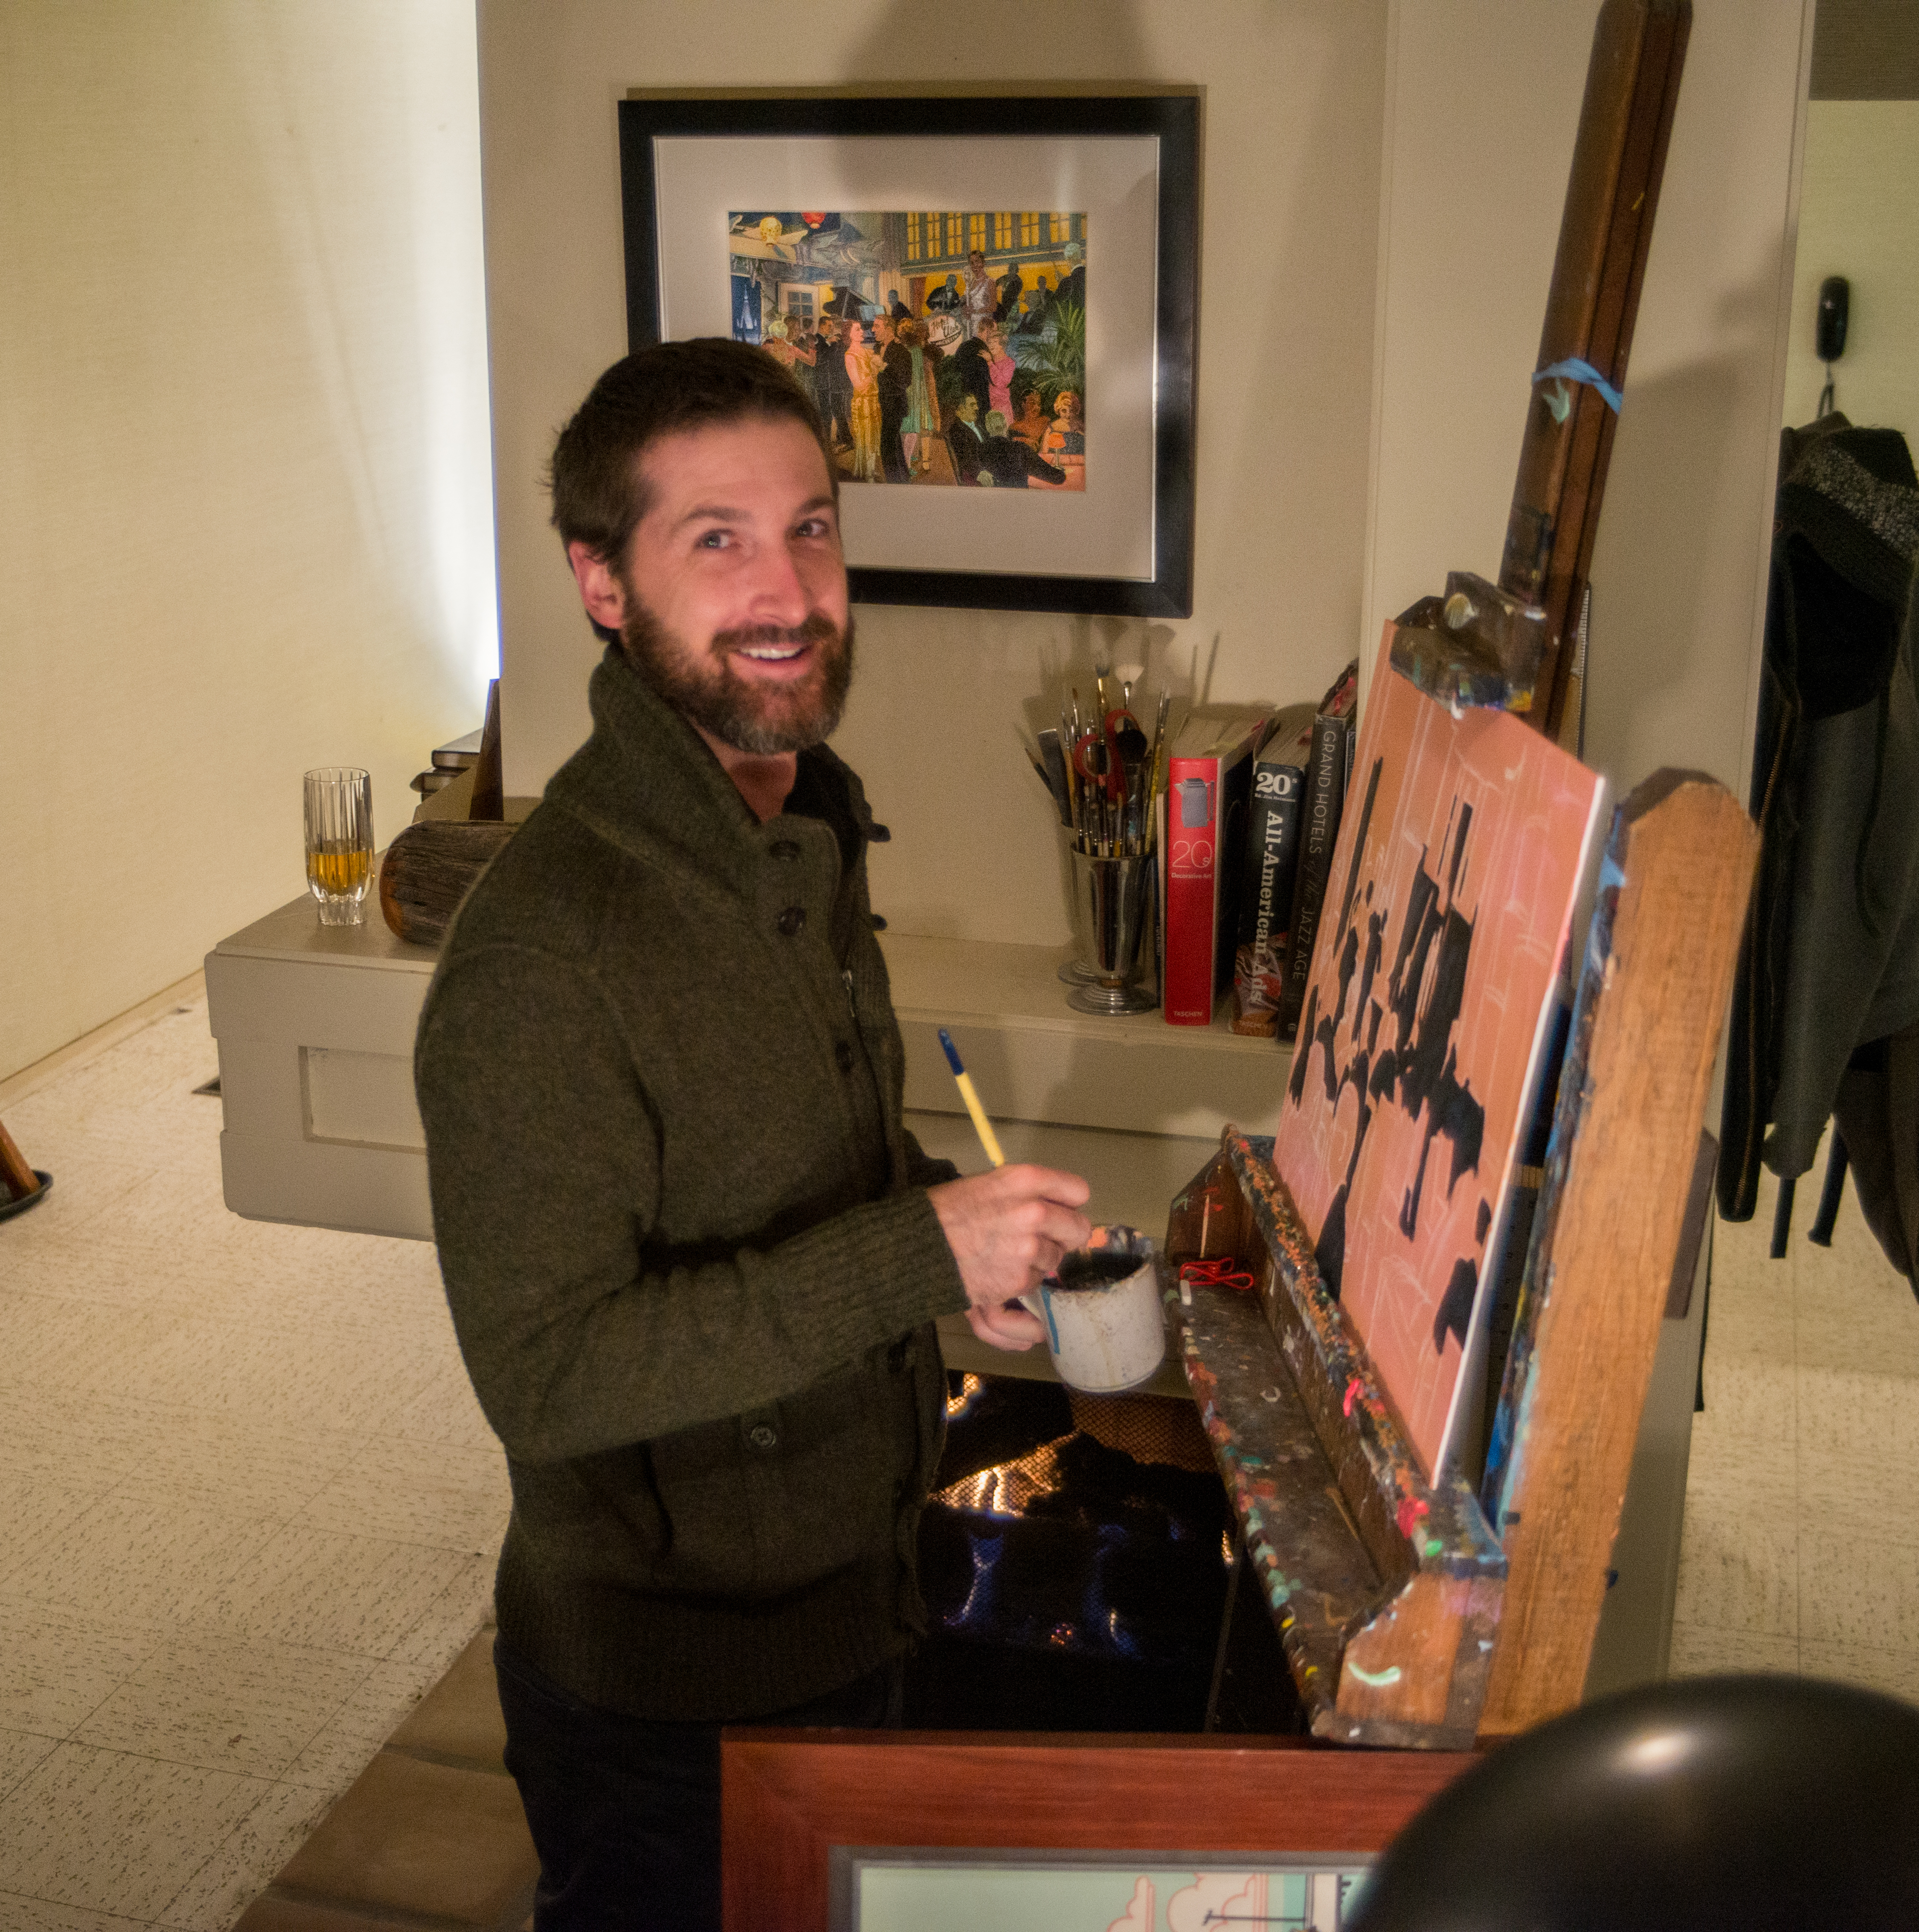 Salt Lake City Painter Combines Art and History to Make a Living